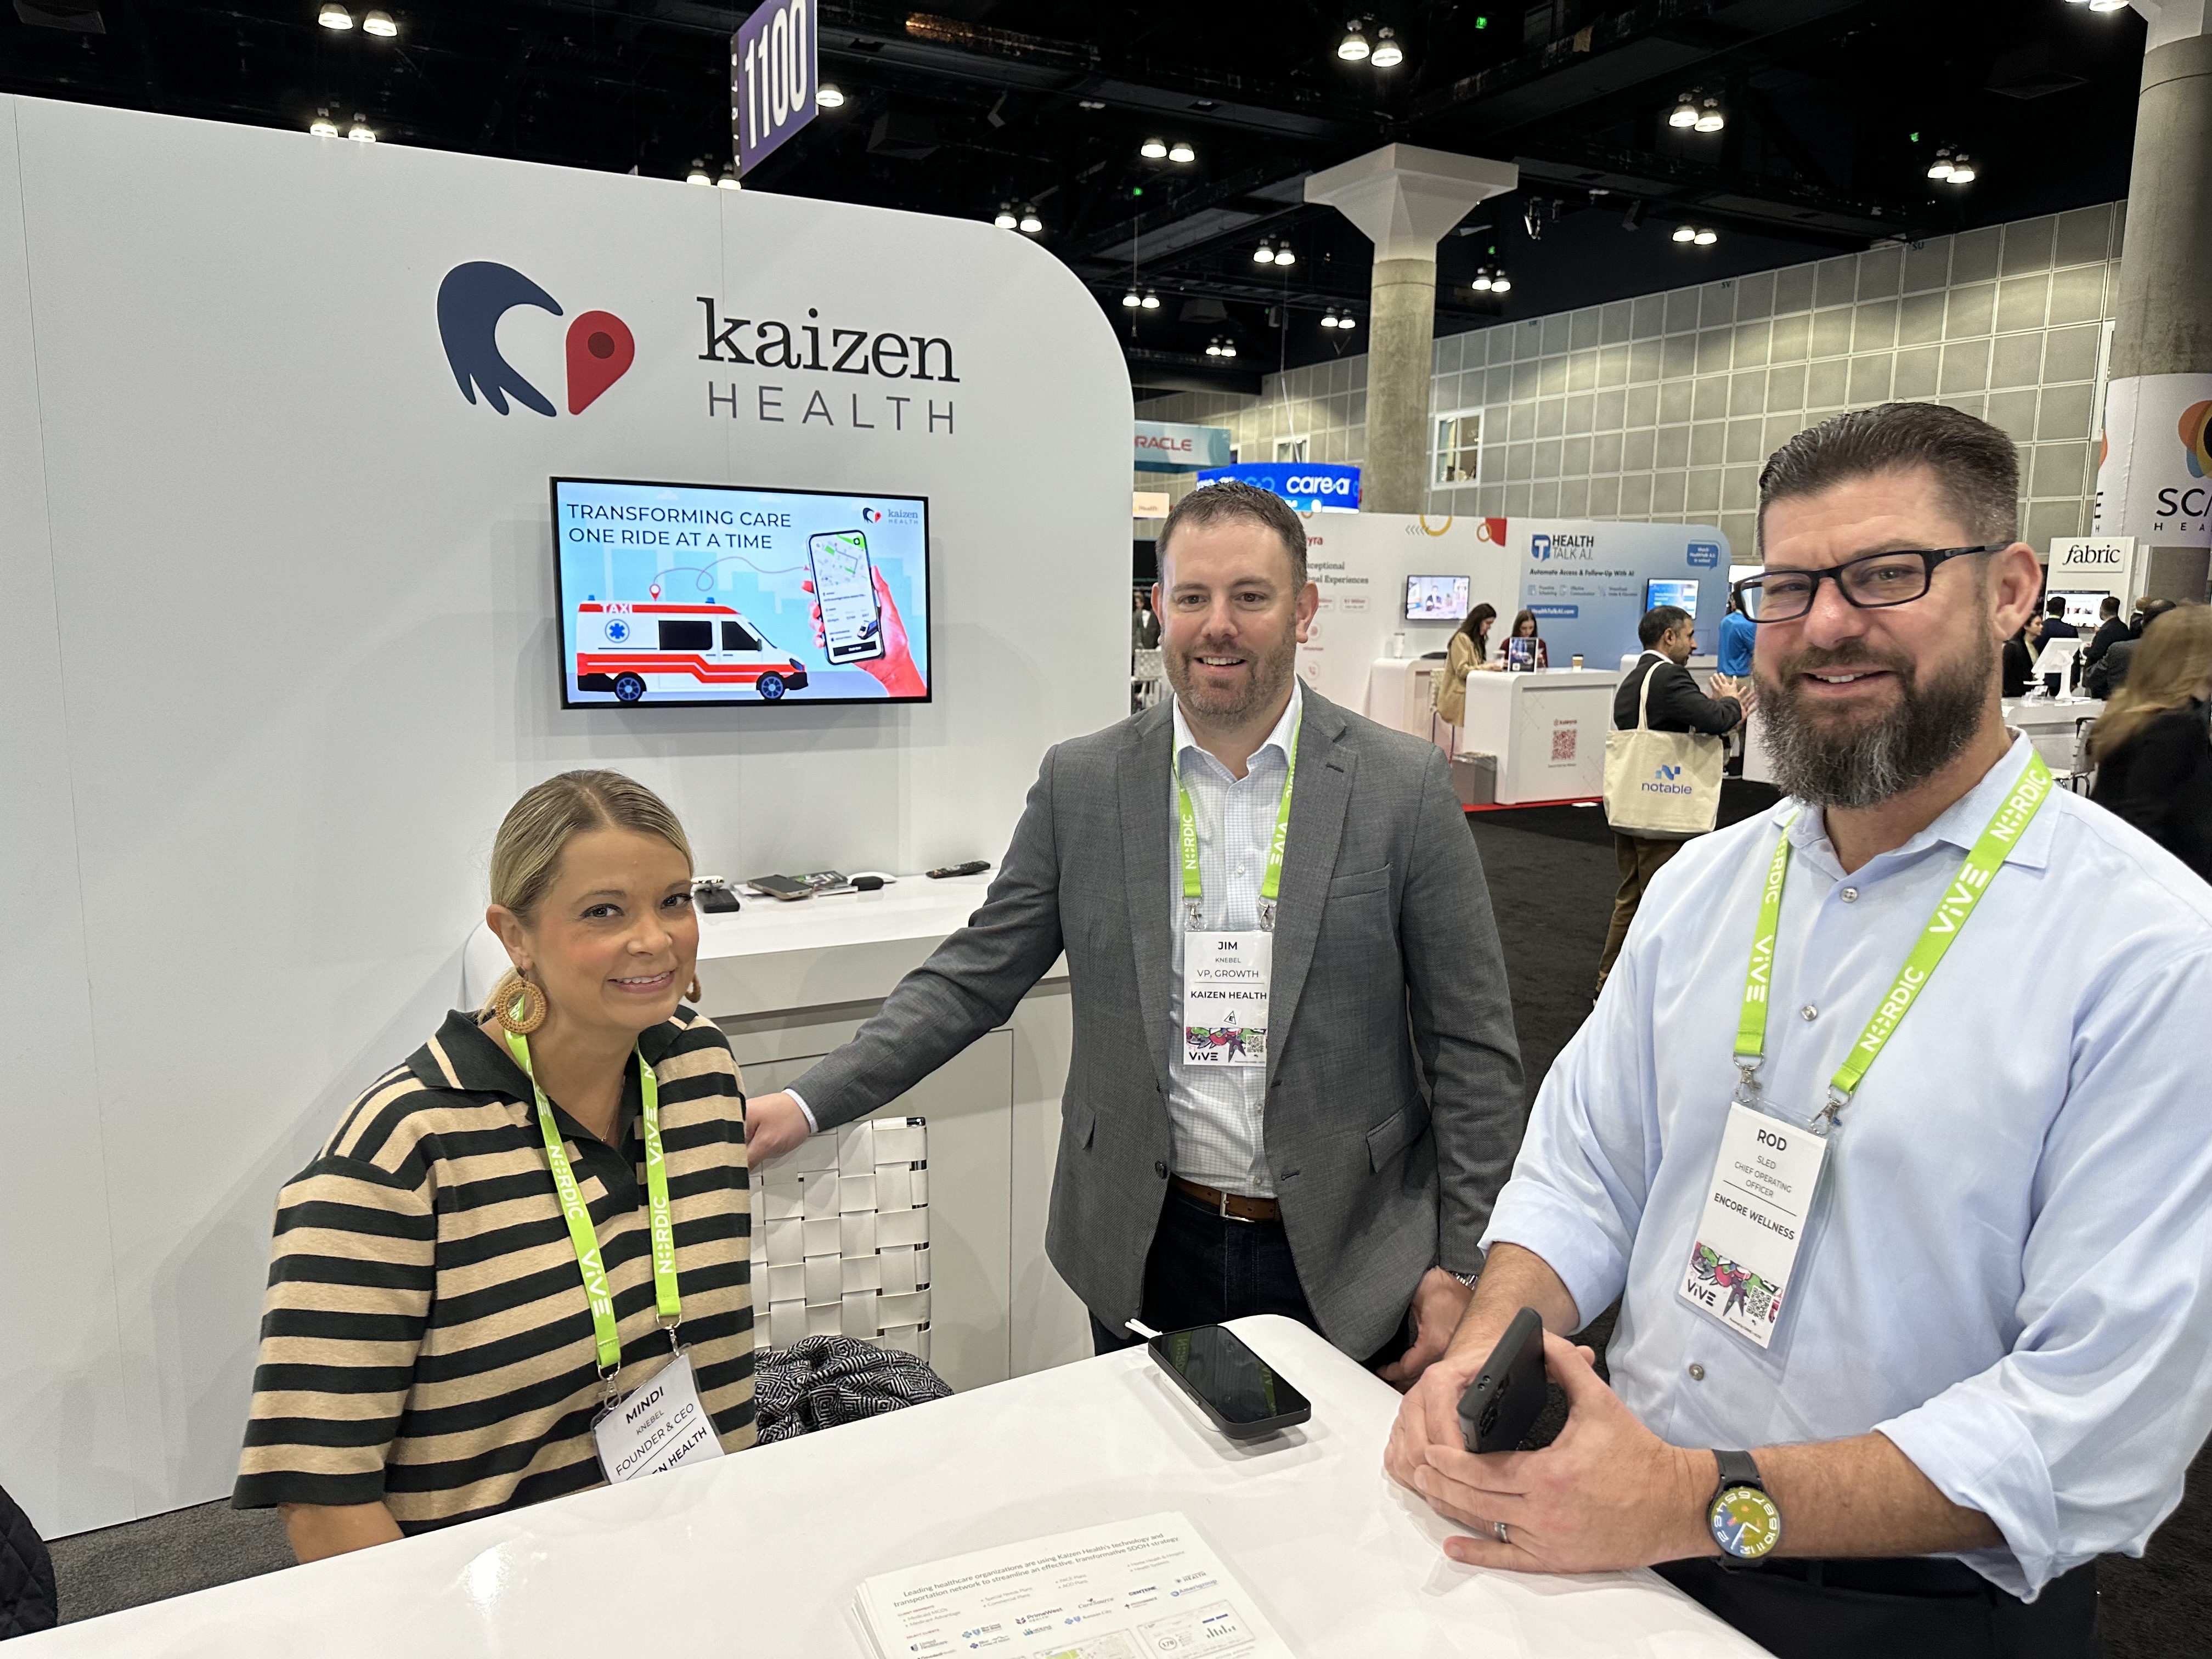 The folks from Kaizen Health get a lot of value from Paubox Email API. Rod Sled from Encore Wellness got a rundown on their uses cases for Paubox.